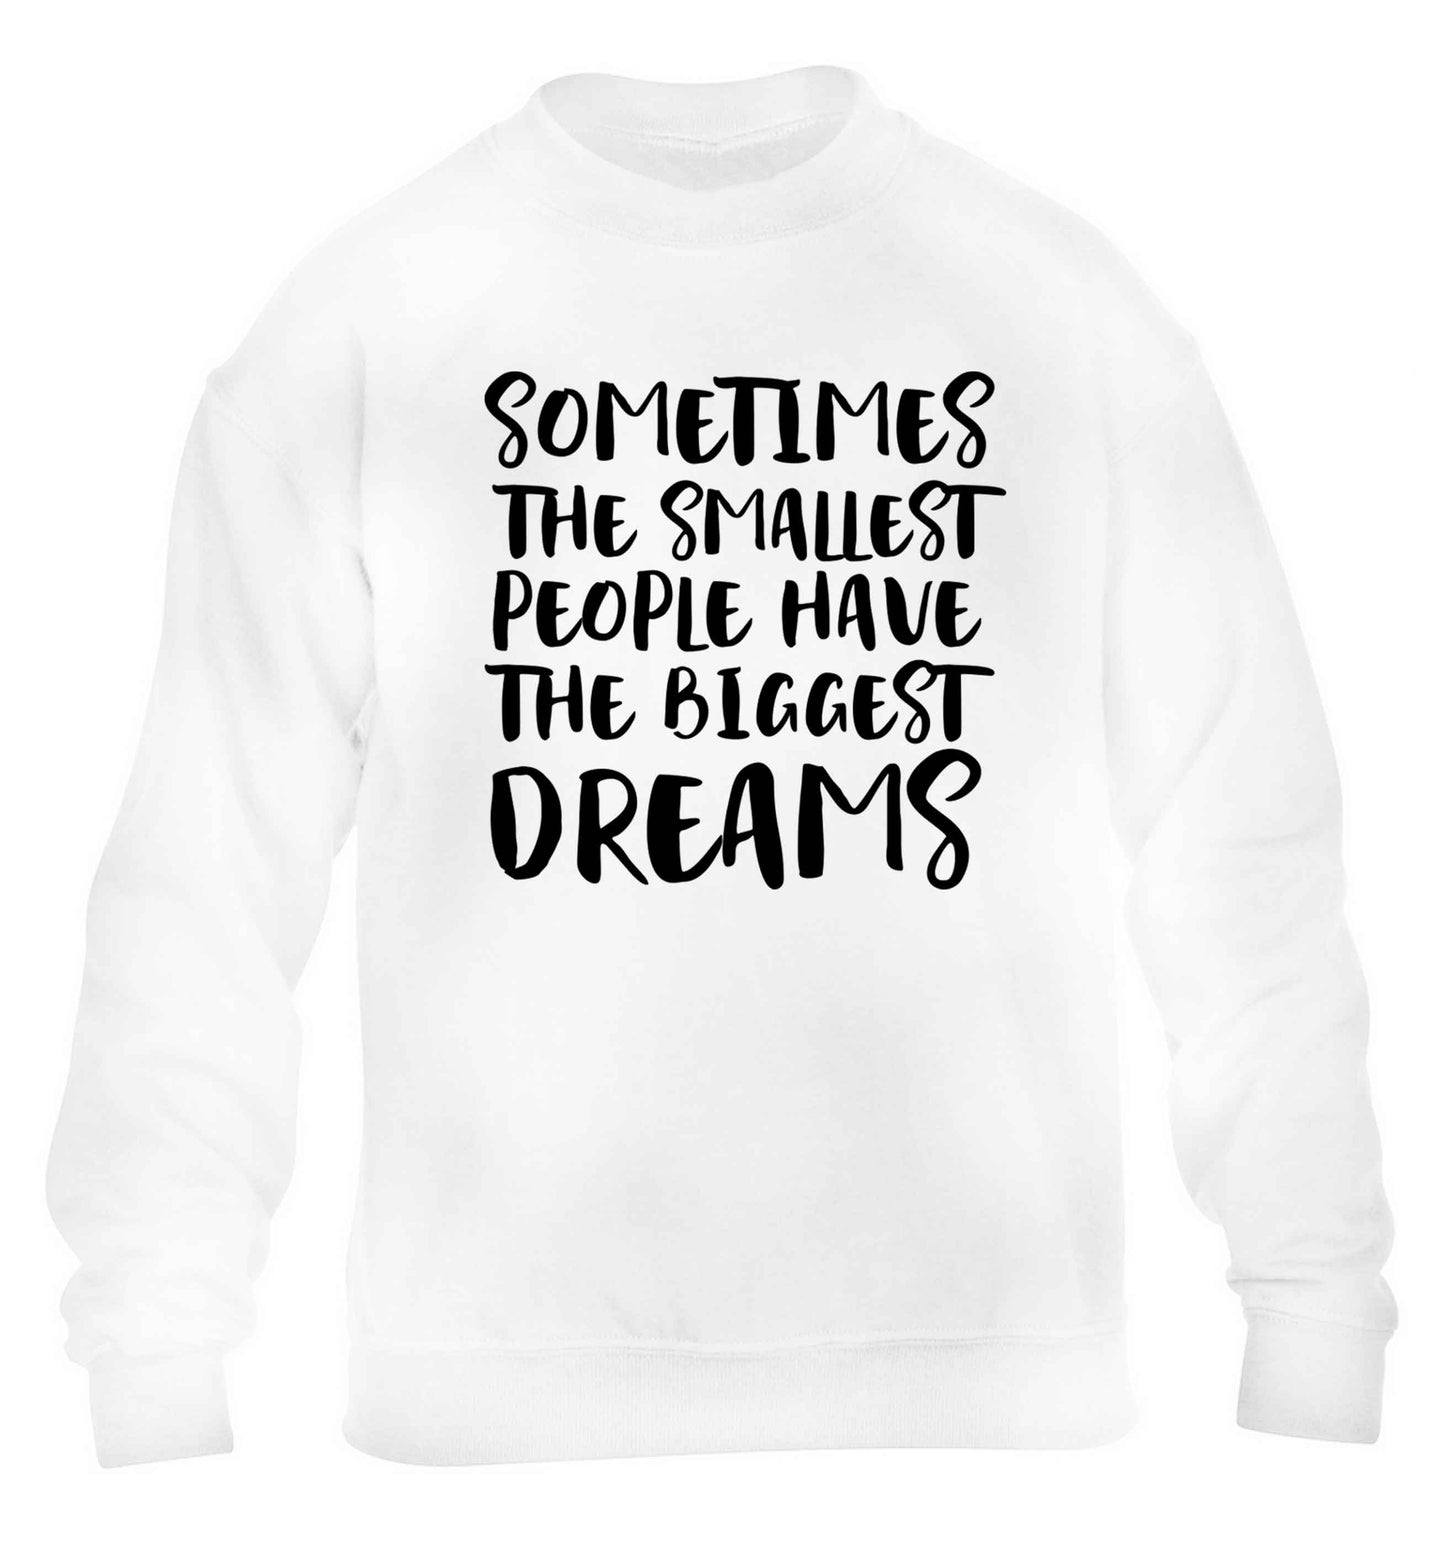 Sometimes the smallest people have the biggest dreams children's white sweater 12-13 Years